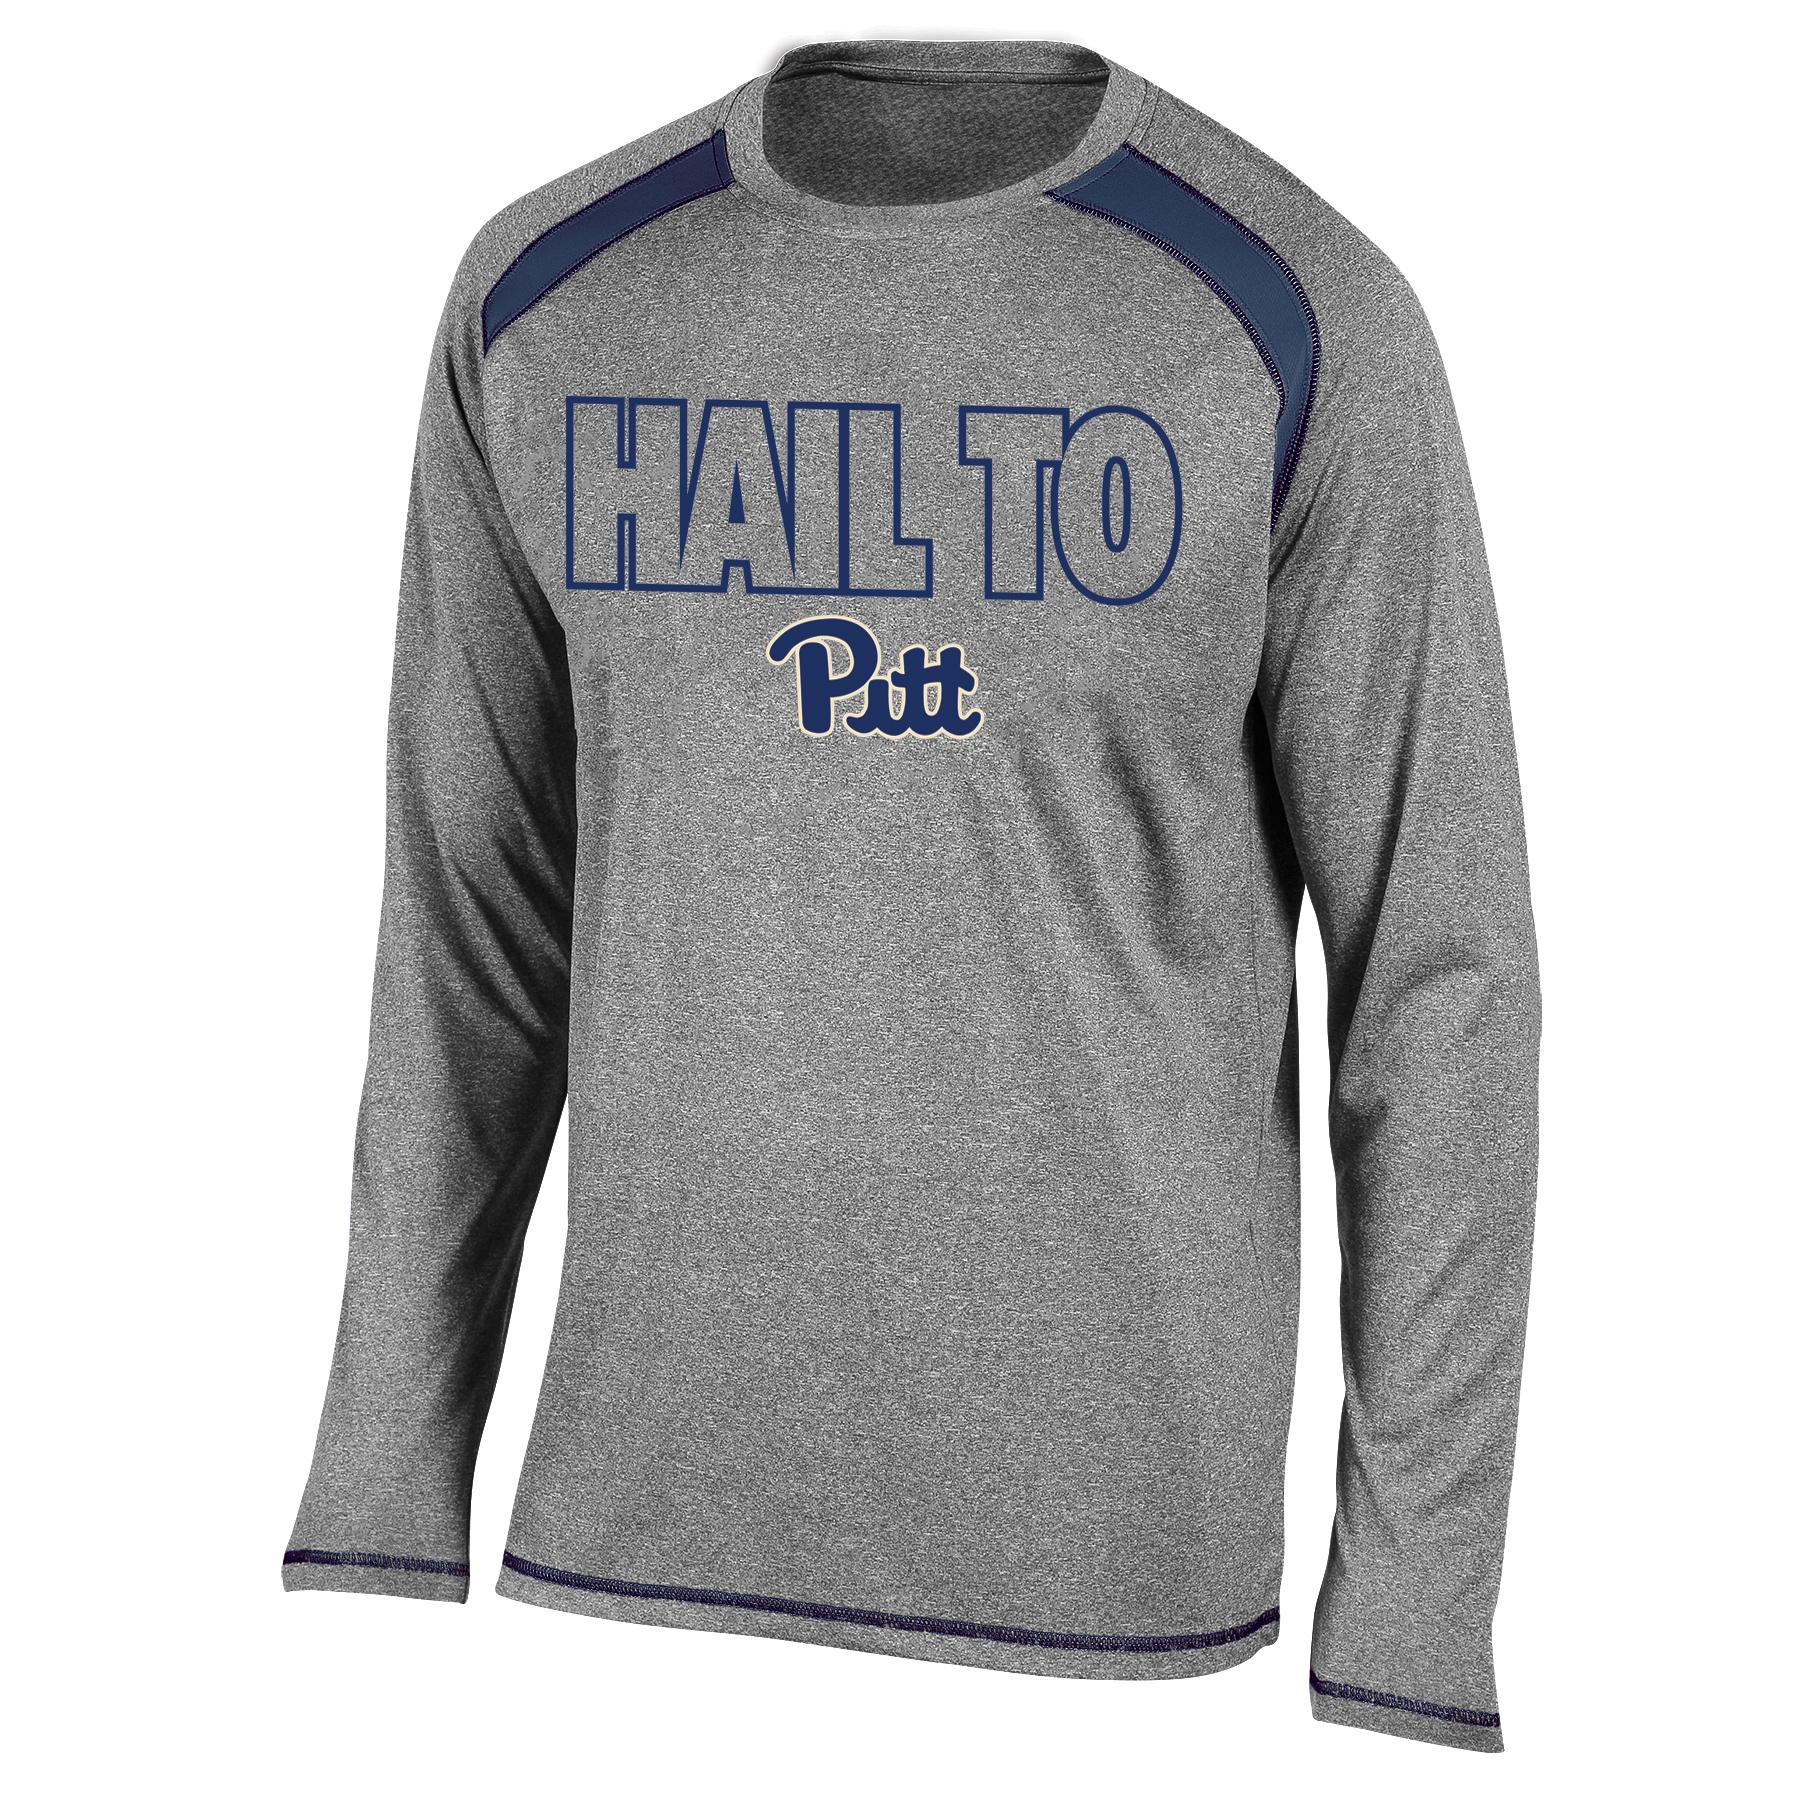 NCAA Men's Athletic Shirt - University of Pittsburgh Panthers